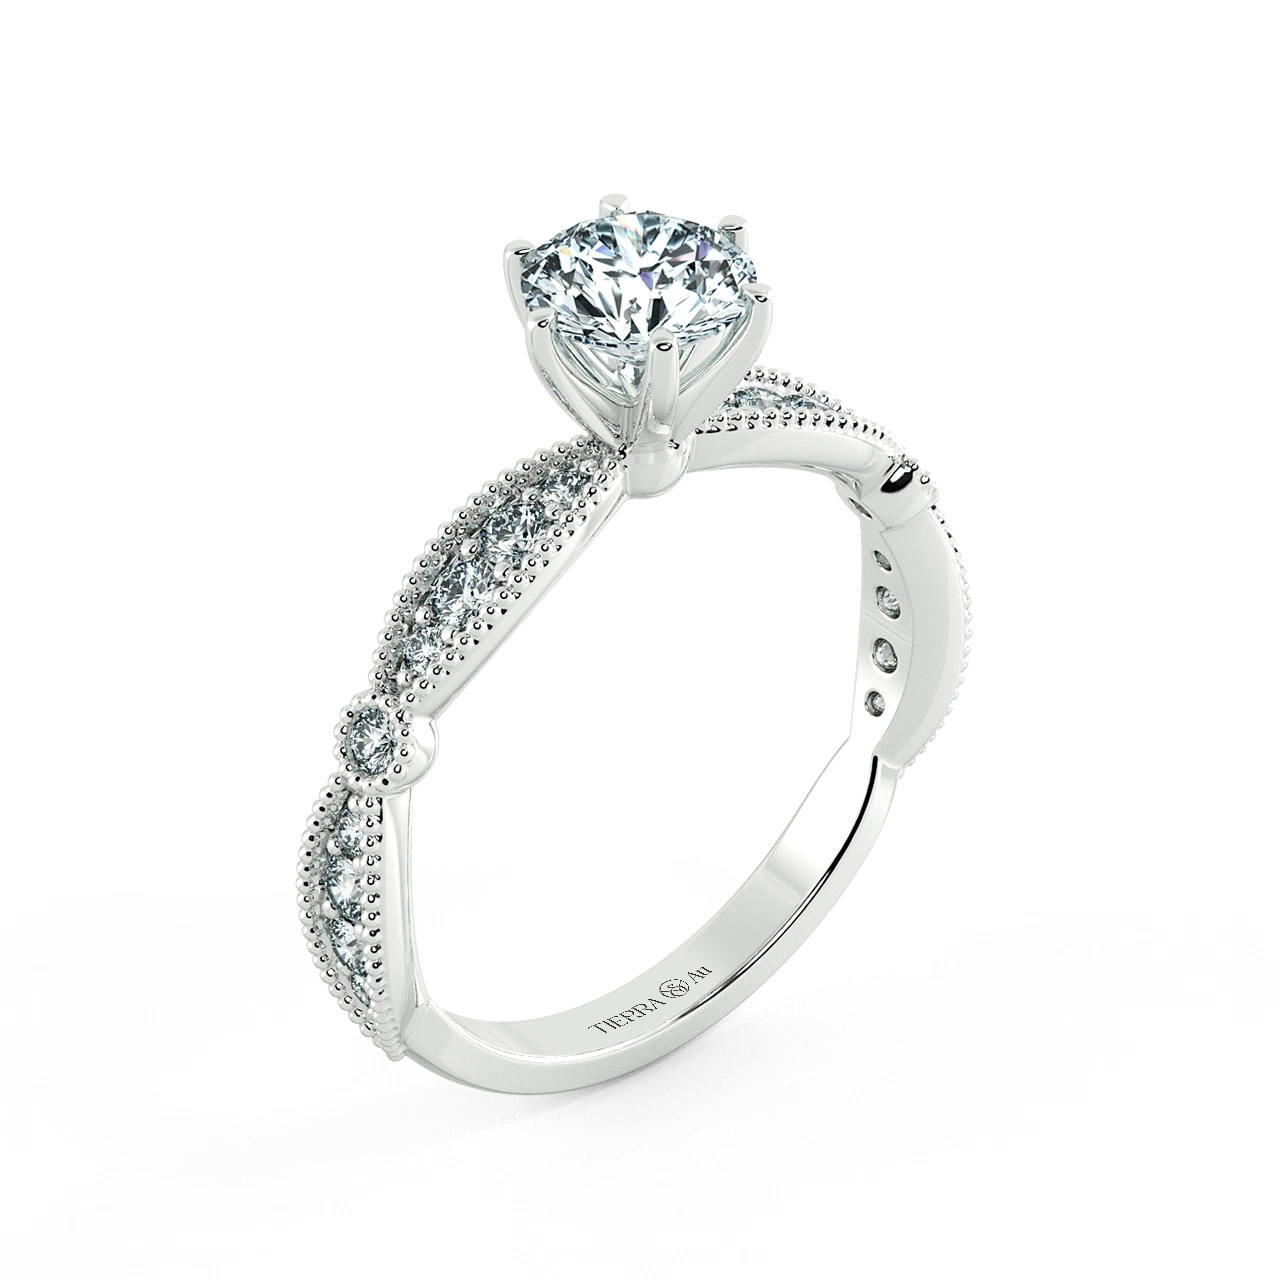 Solitaire Engagement Ring with Eternity Band NCH1803 4